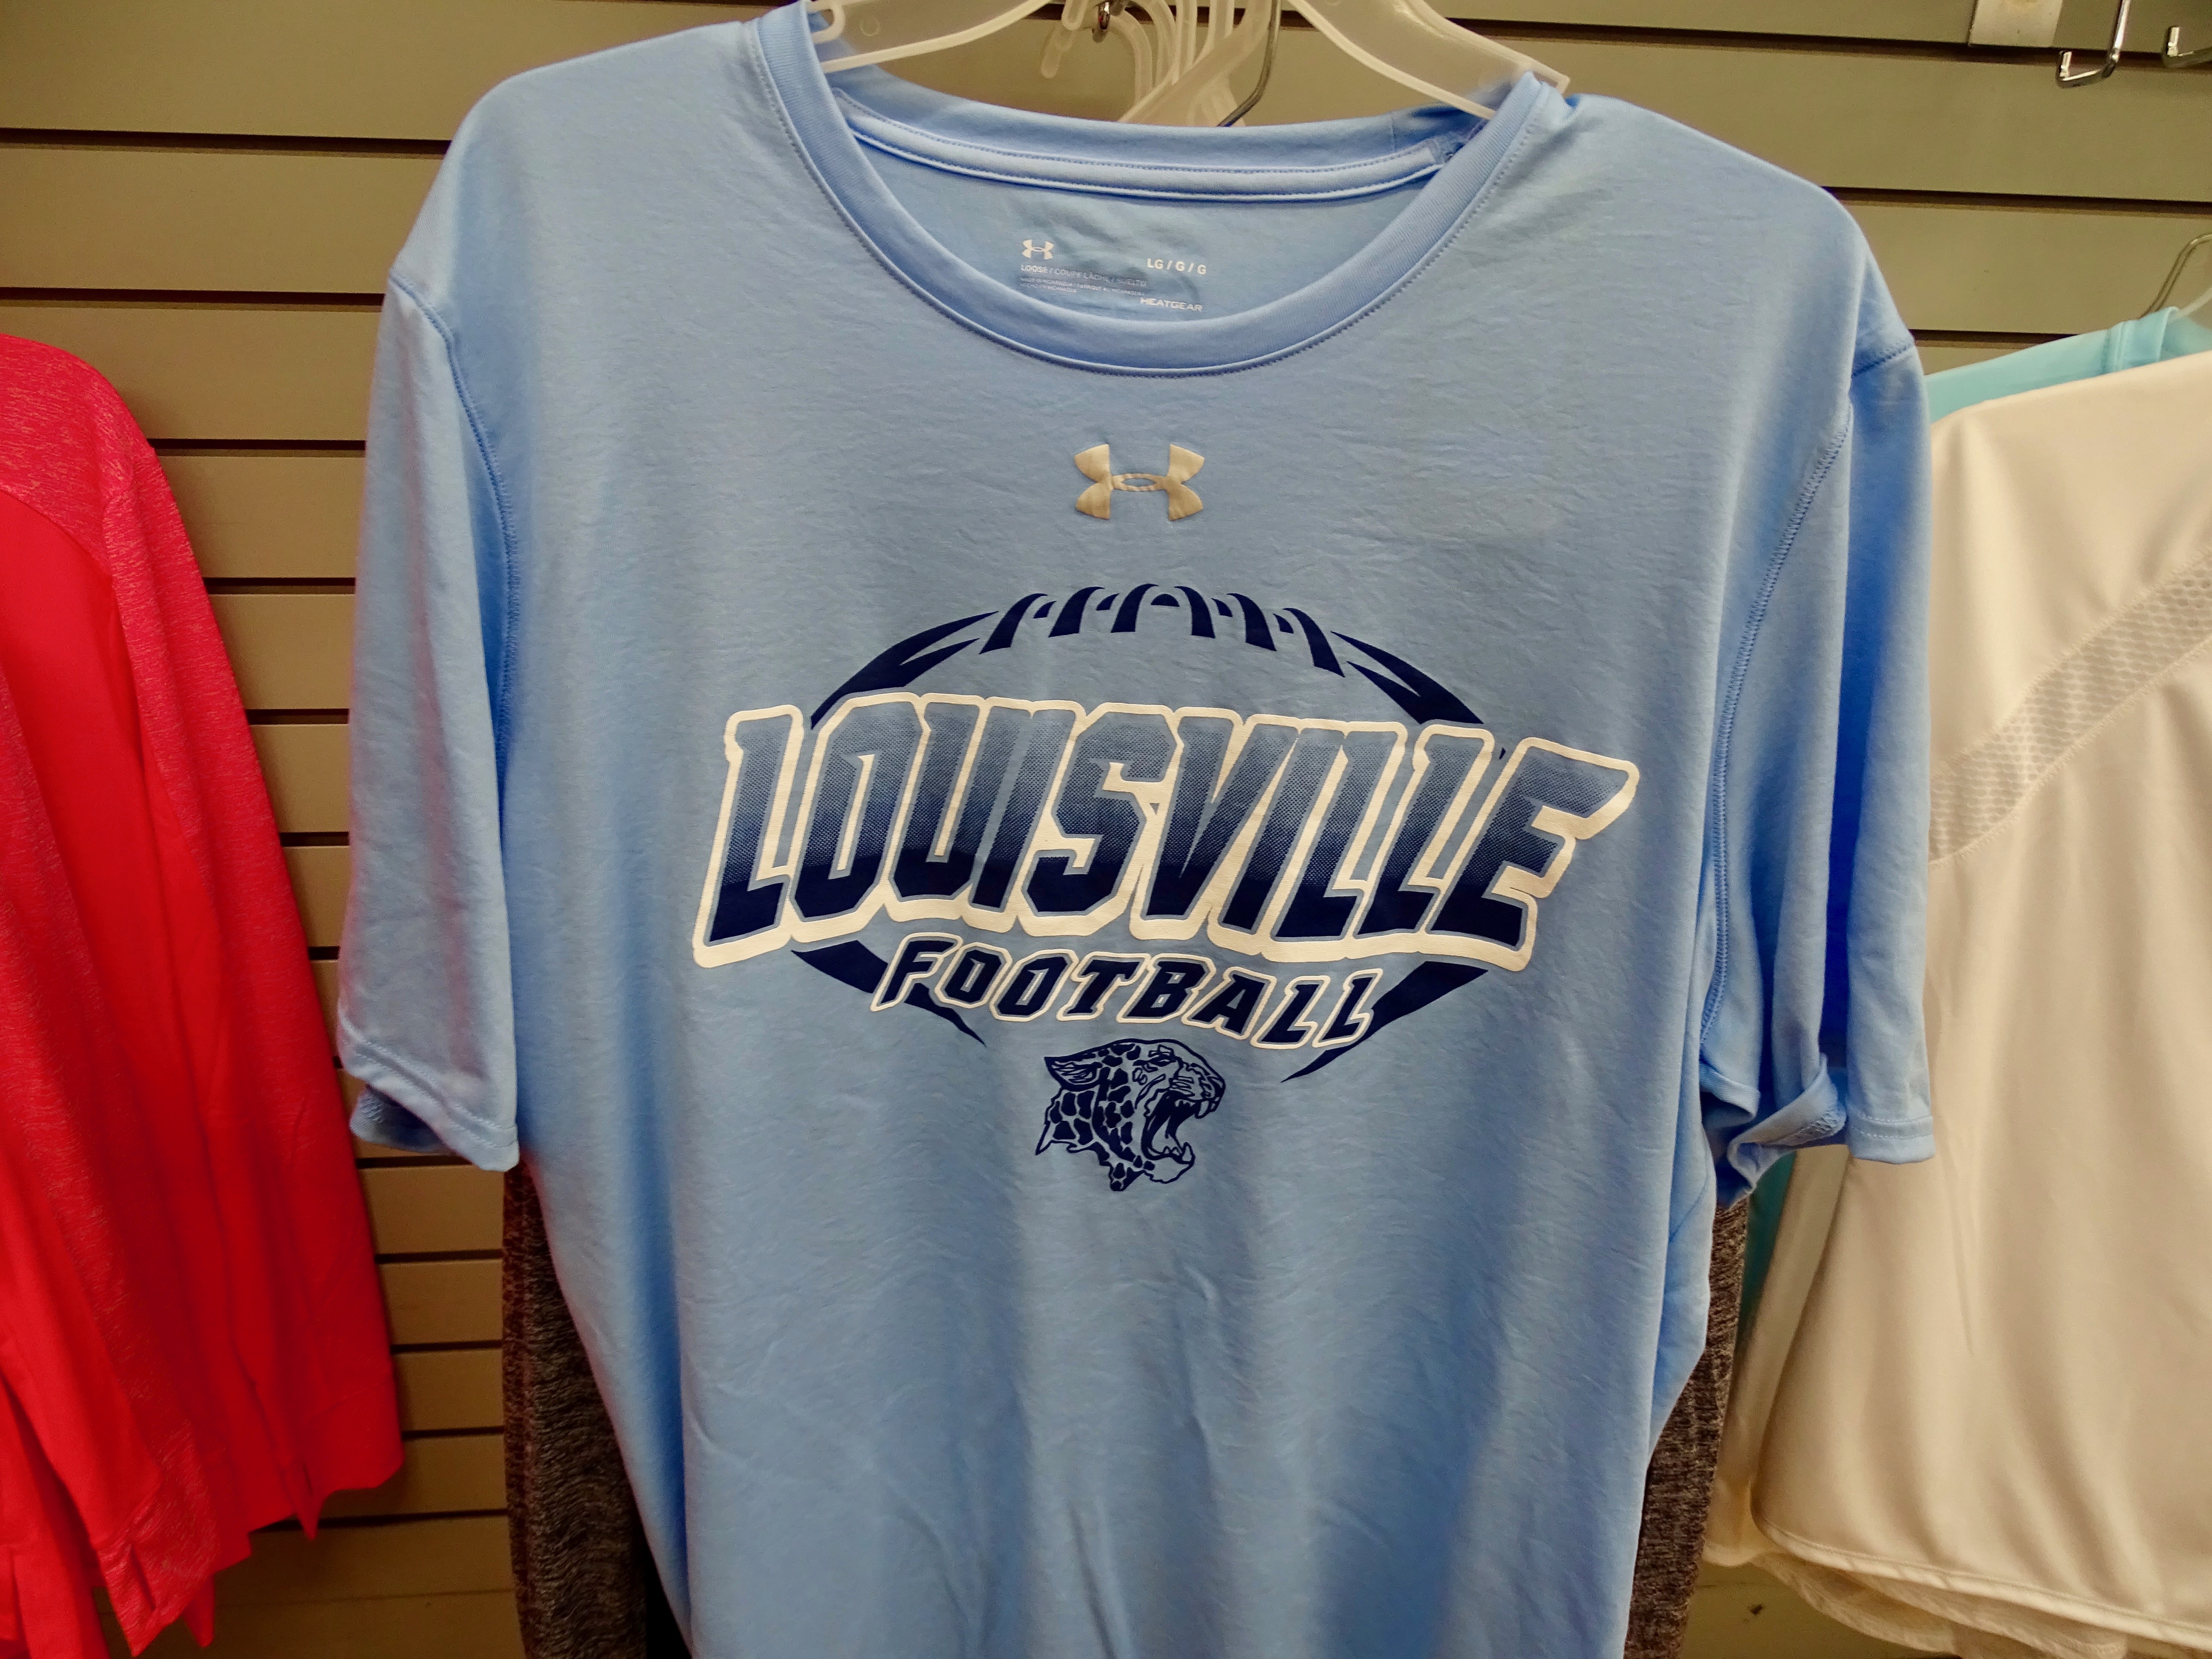 New Leopards Apparel in at Beatty's Sports